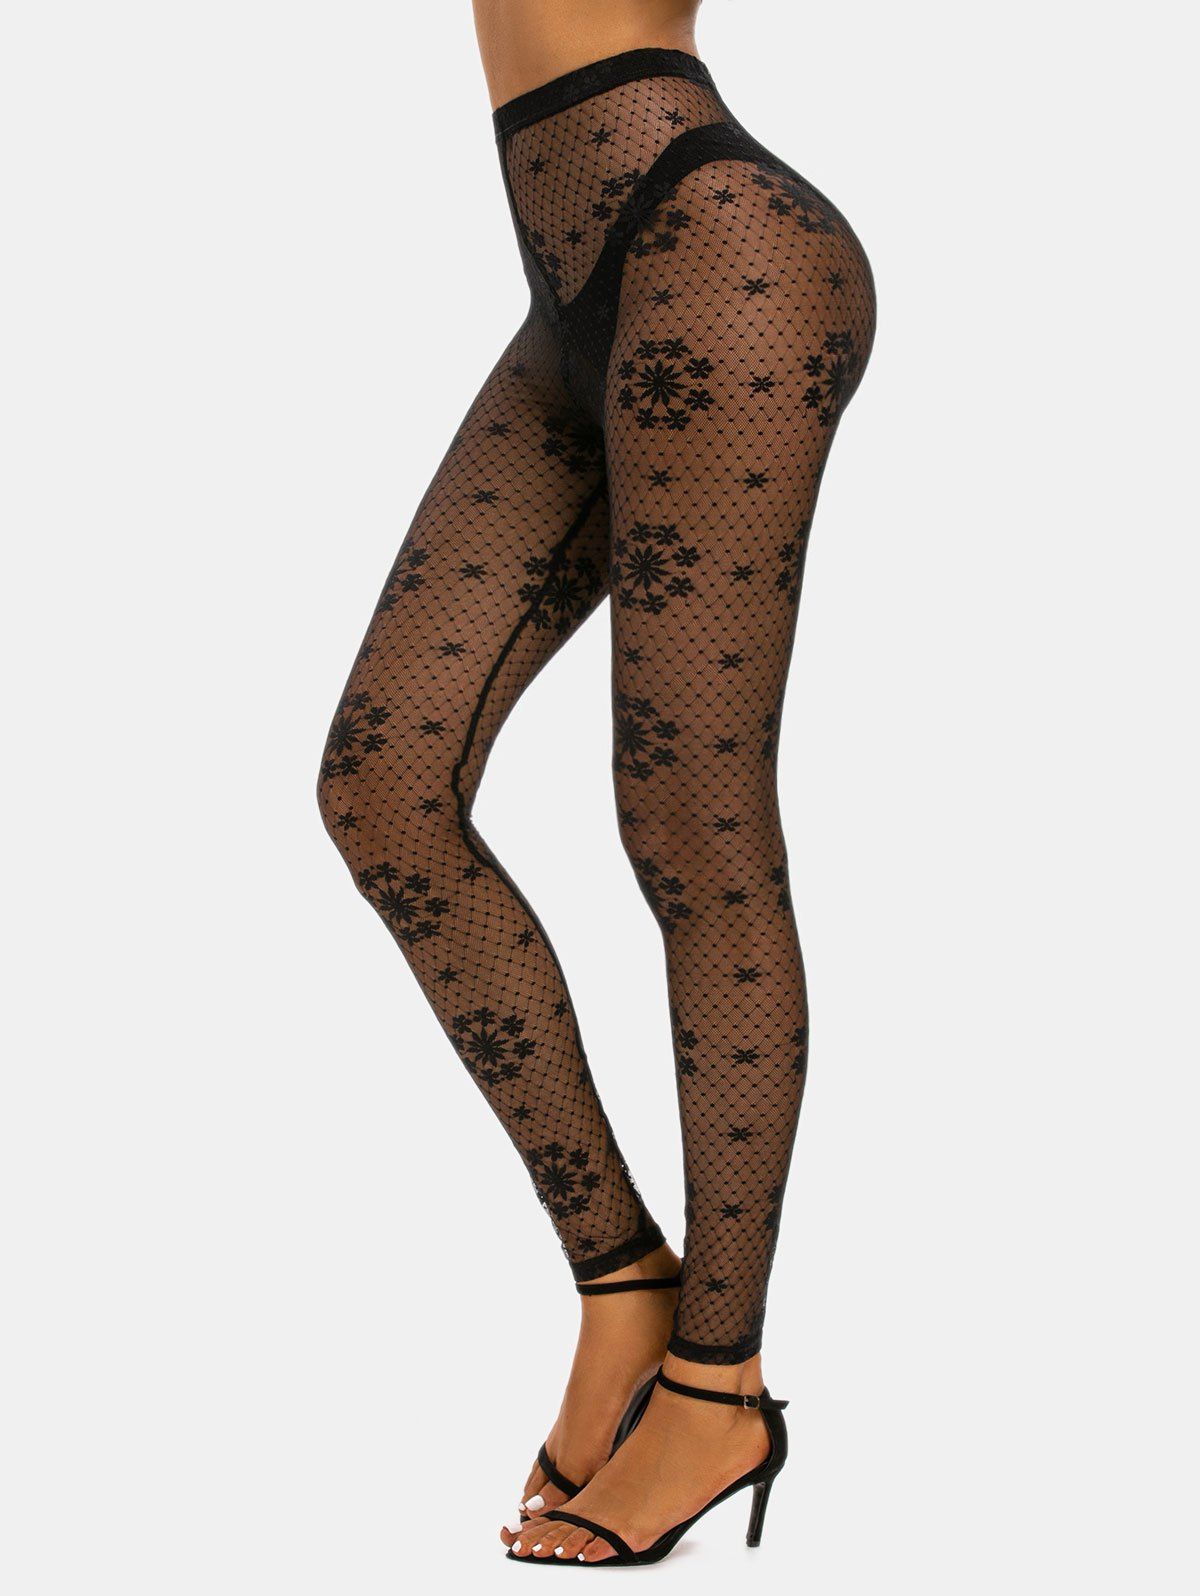 See Through Leggings For Sale  International Society of Precision